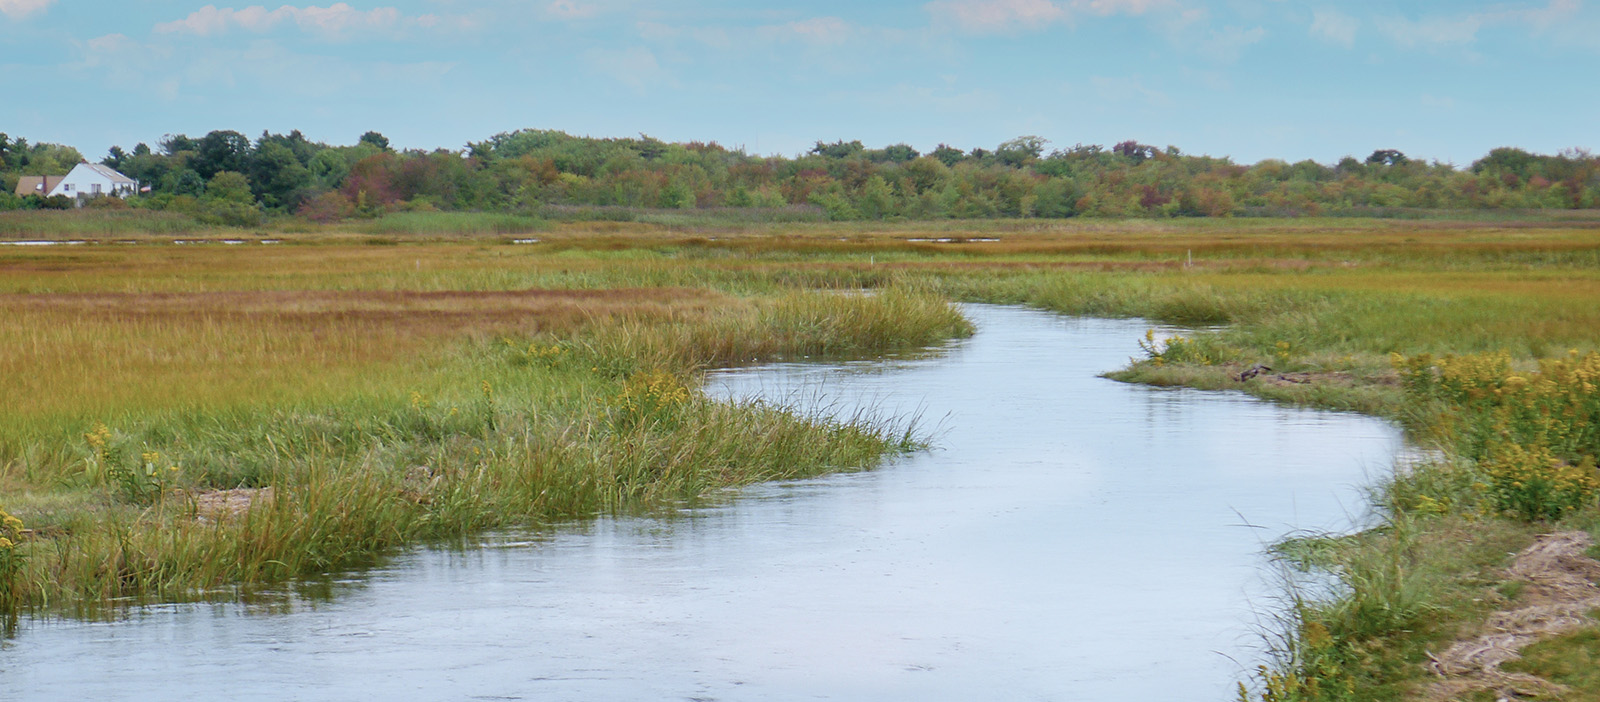 Salt marsh with tree line in the background. A stream cuts through grassy area.